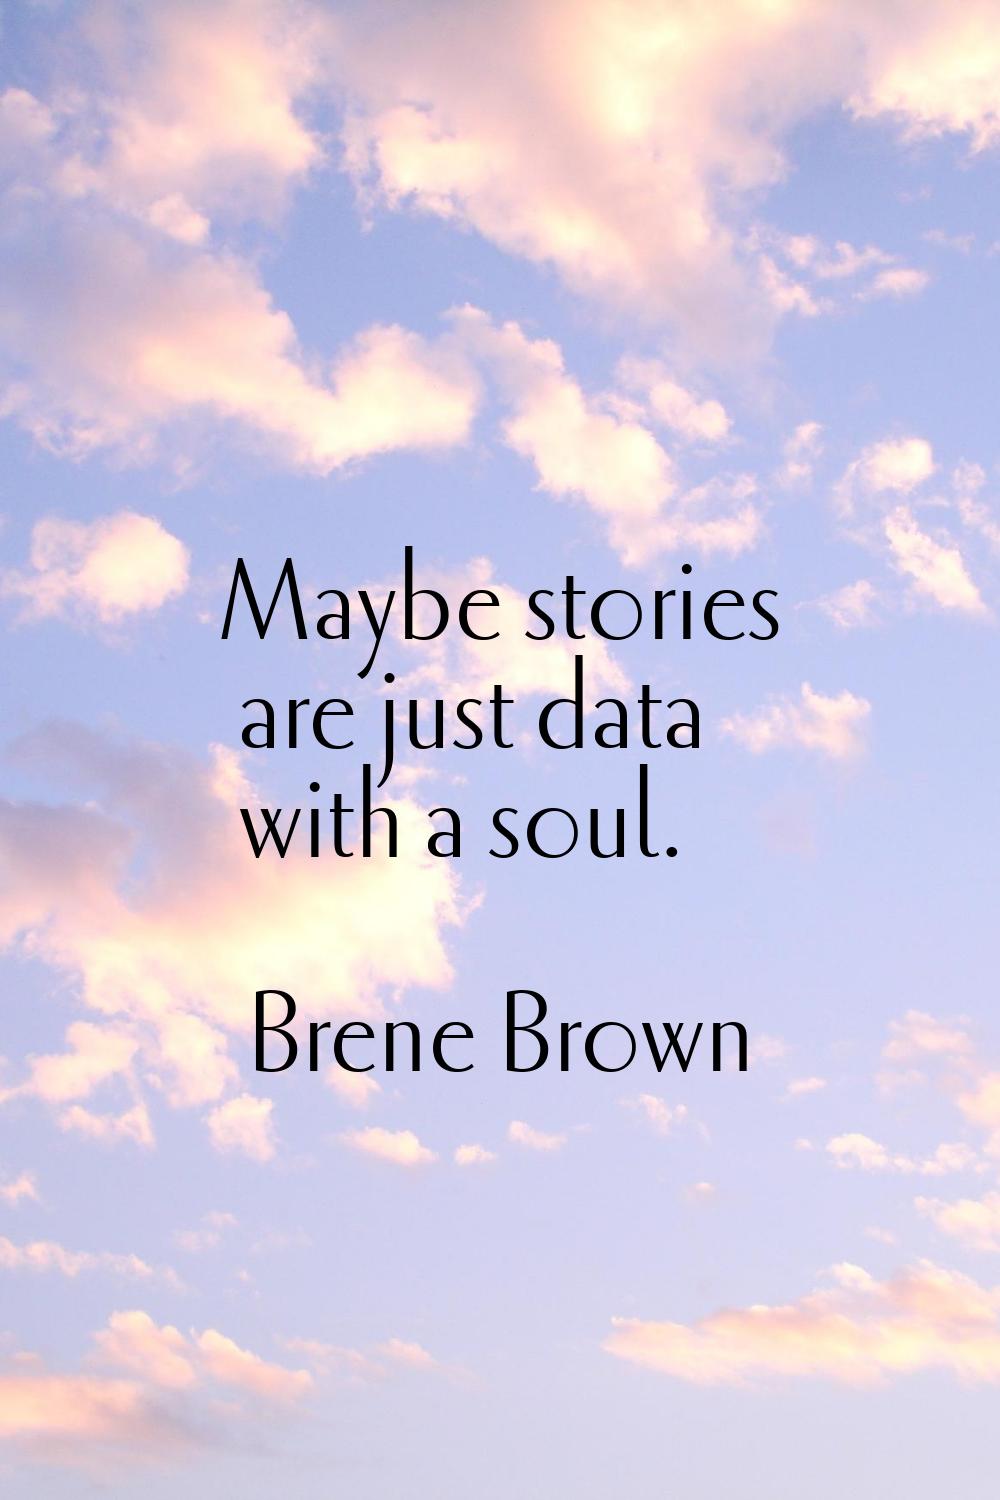 Maybe stories are just data with a soul.